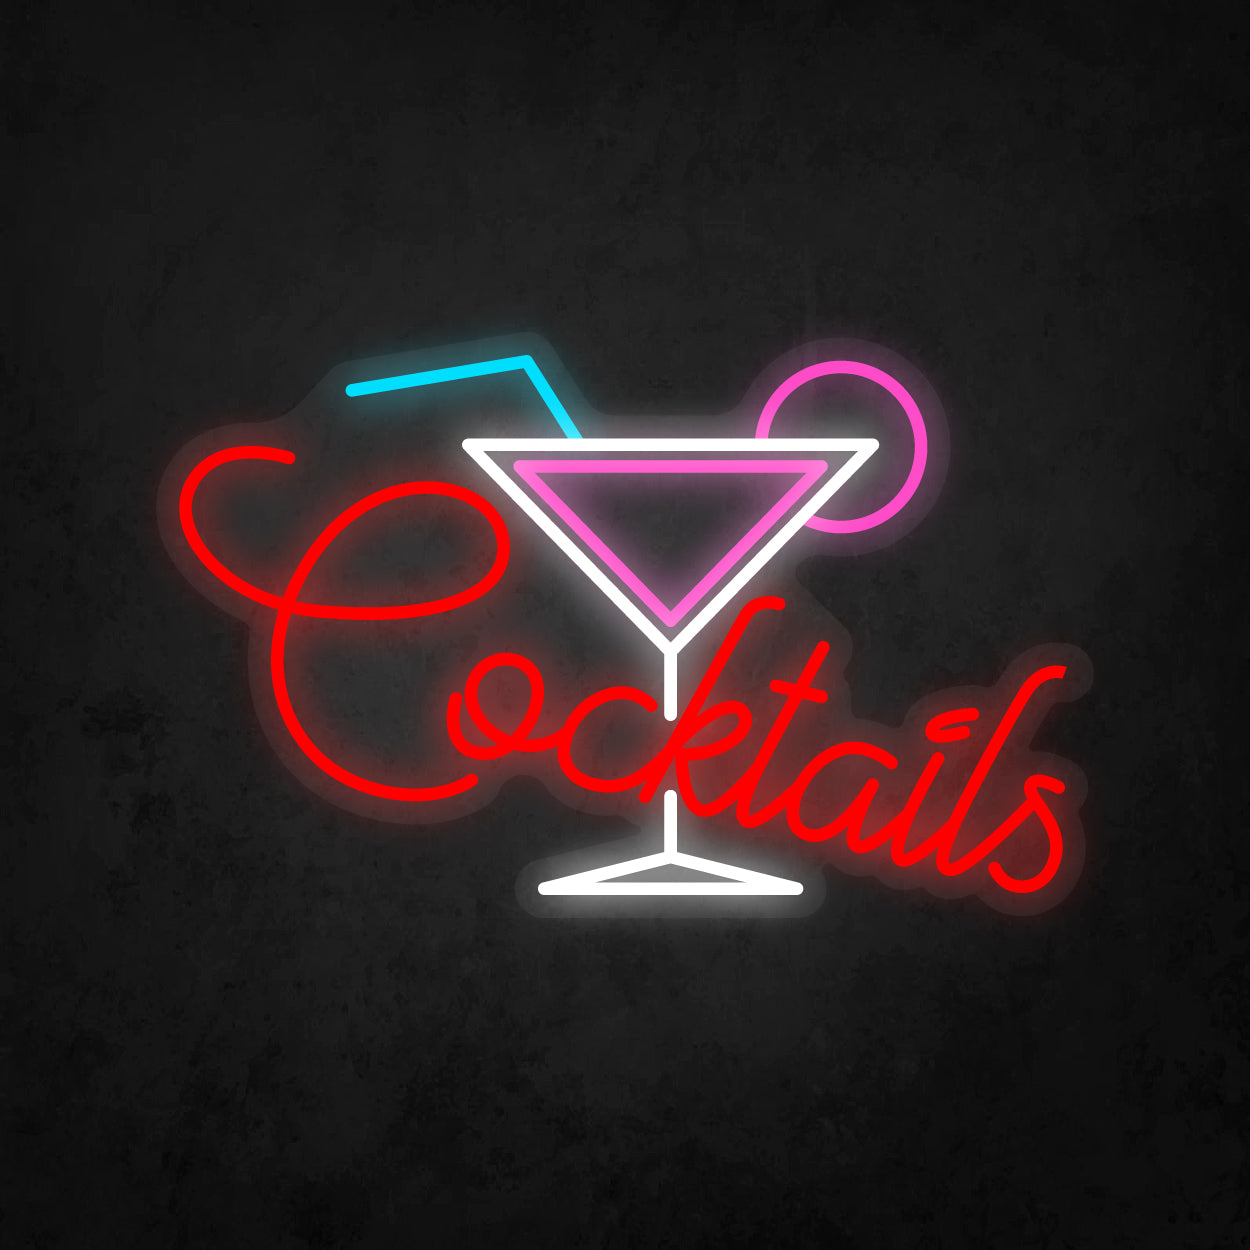 LED Neon Sign - A Glass With Cocktail, Lemon Slices, Straw